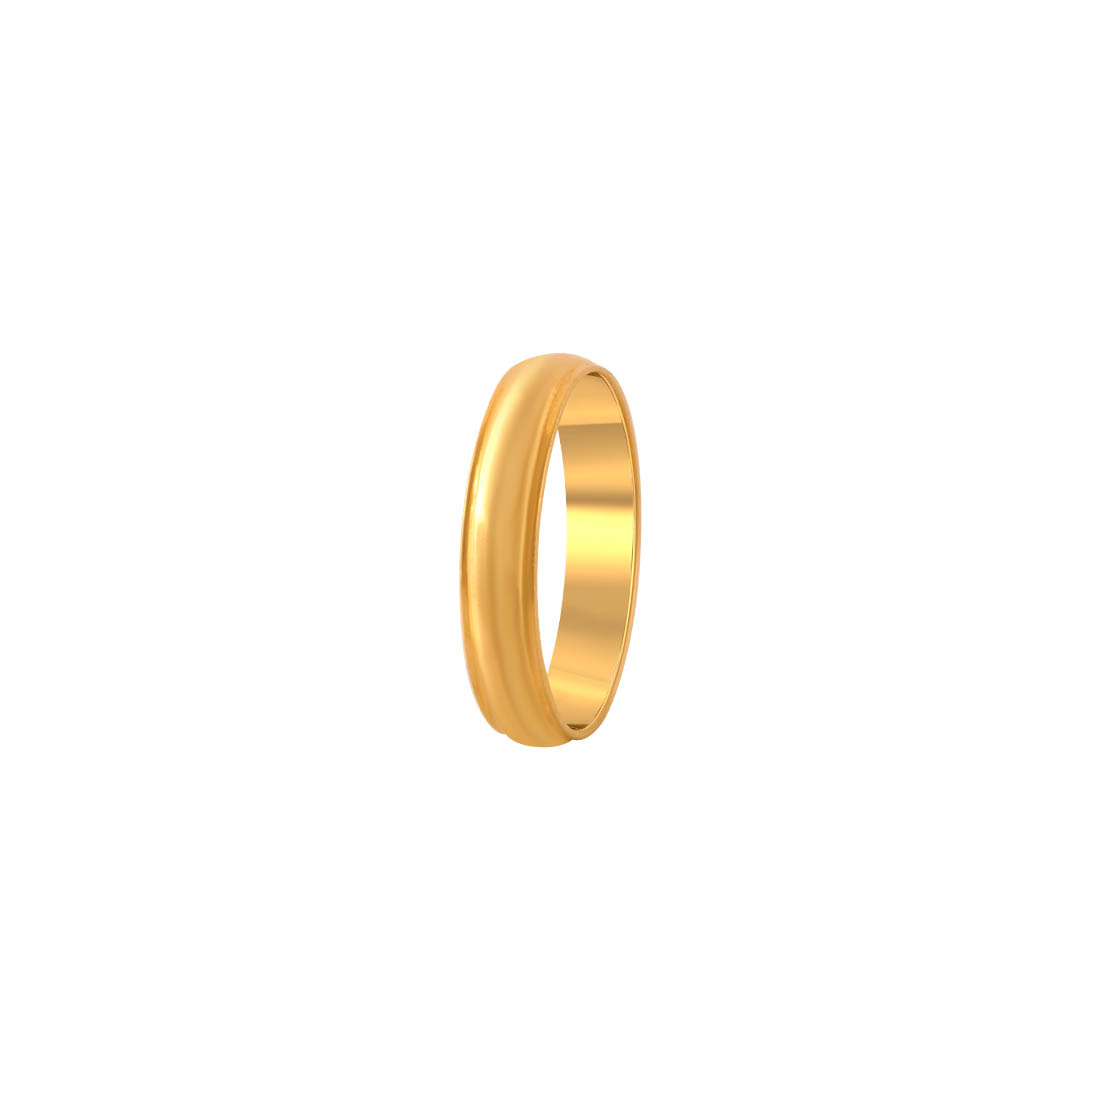 Buy Victorian 1905 22K Gold Wedding Band Ring Online in India - Etsy